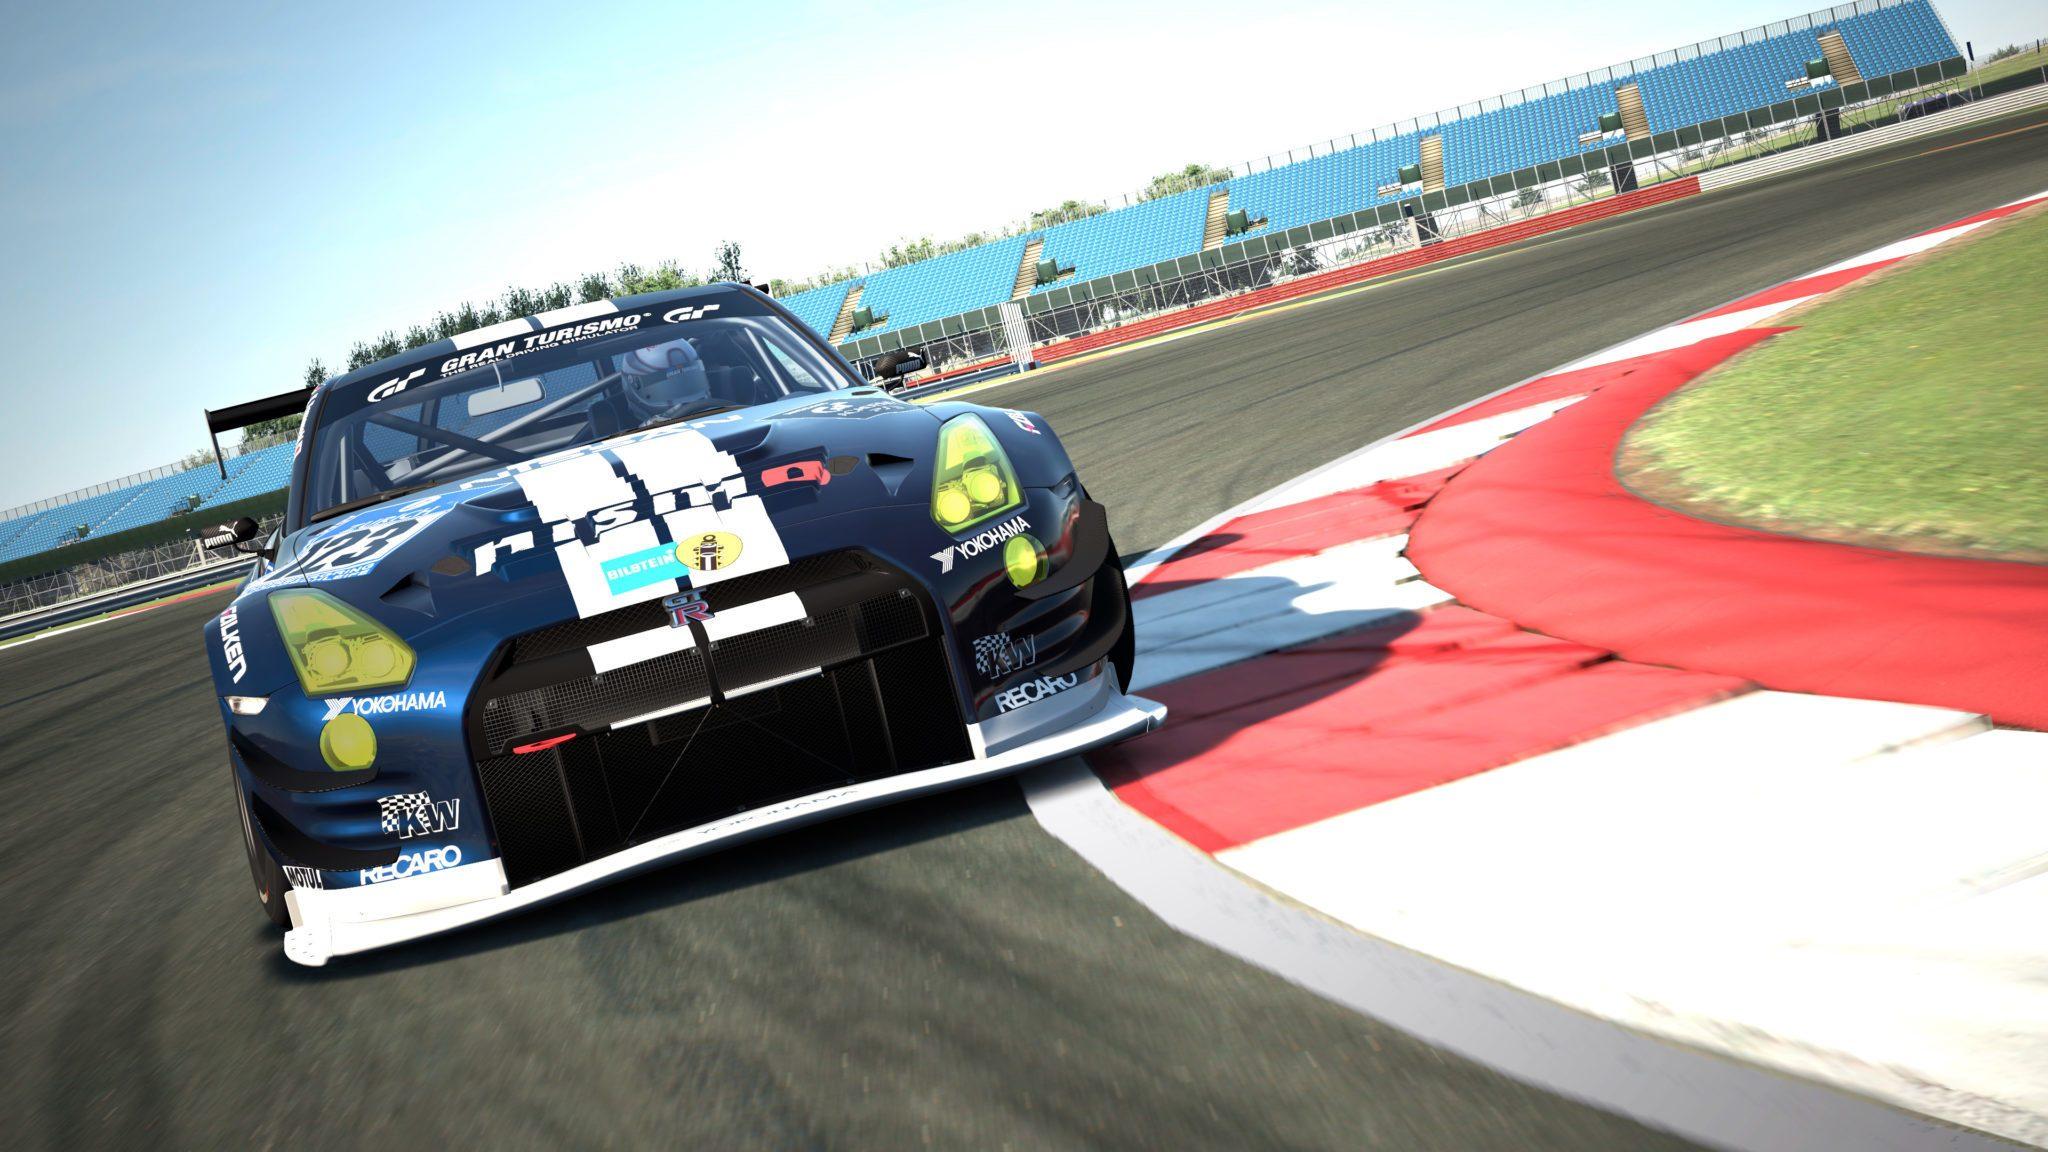 New Gran Turismo 6 Trailer and Features List Revealed! 